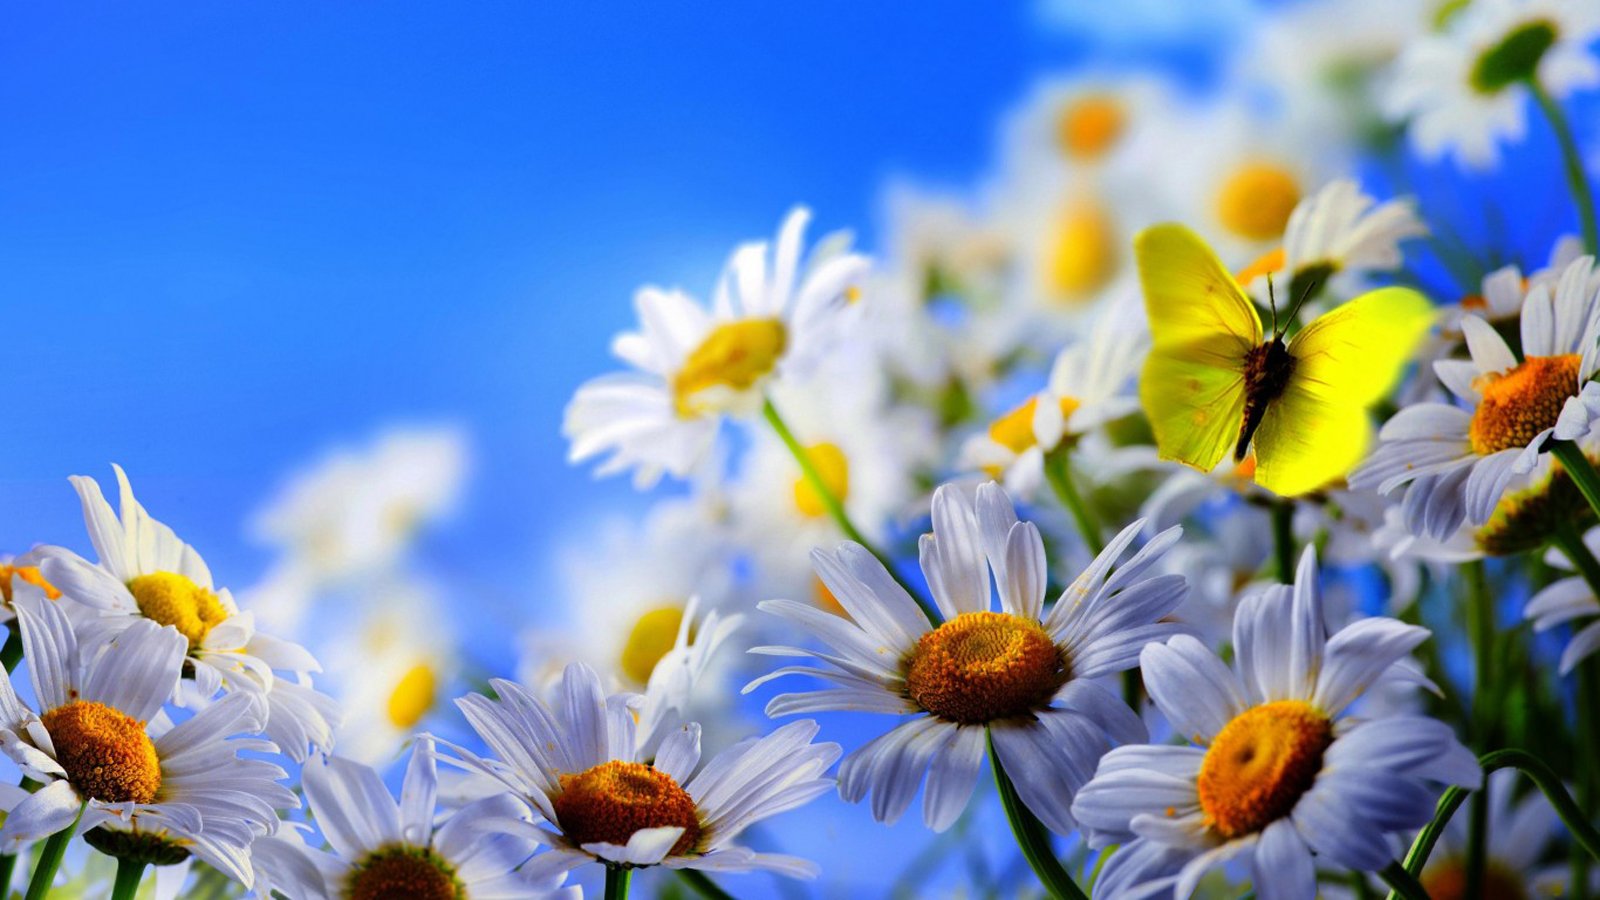 bunch of white daisies flower garden mobile background images